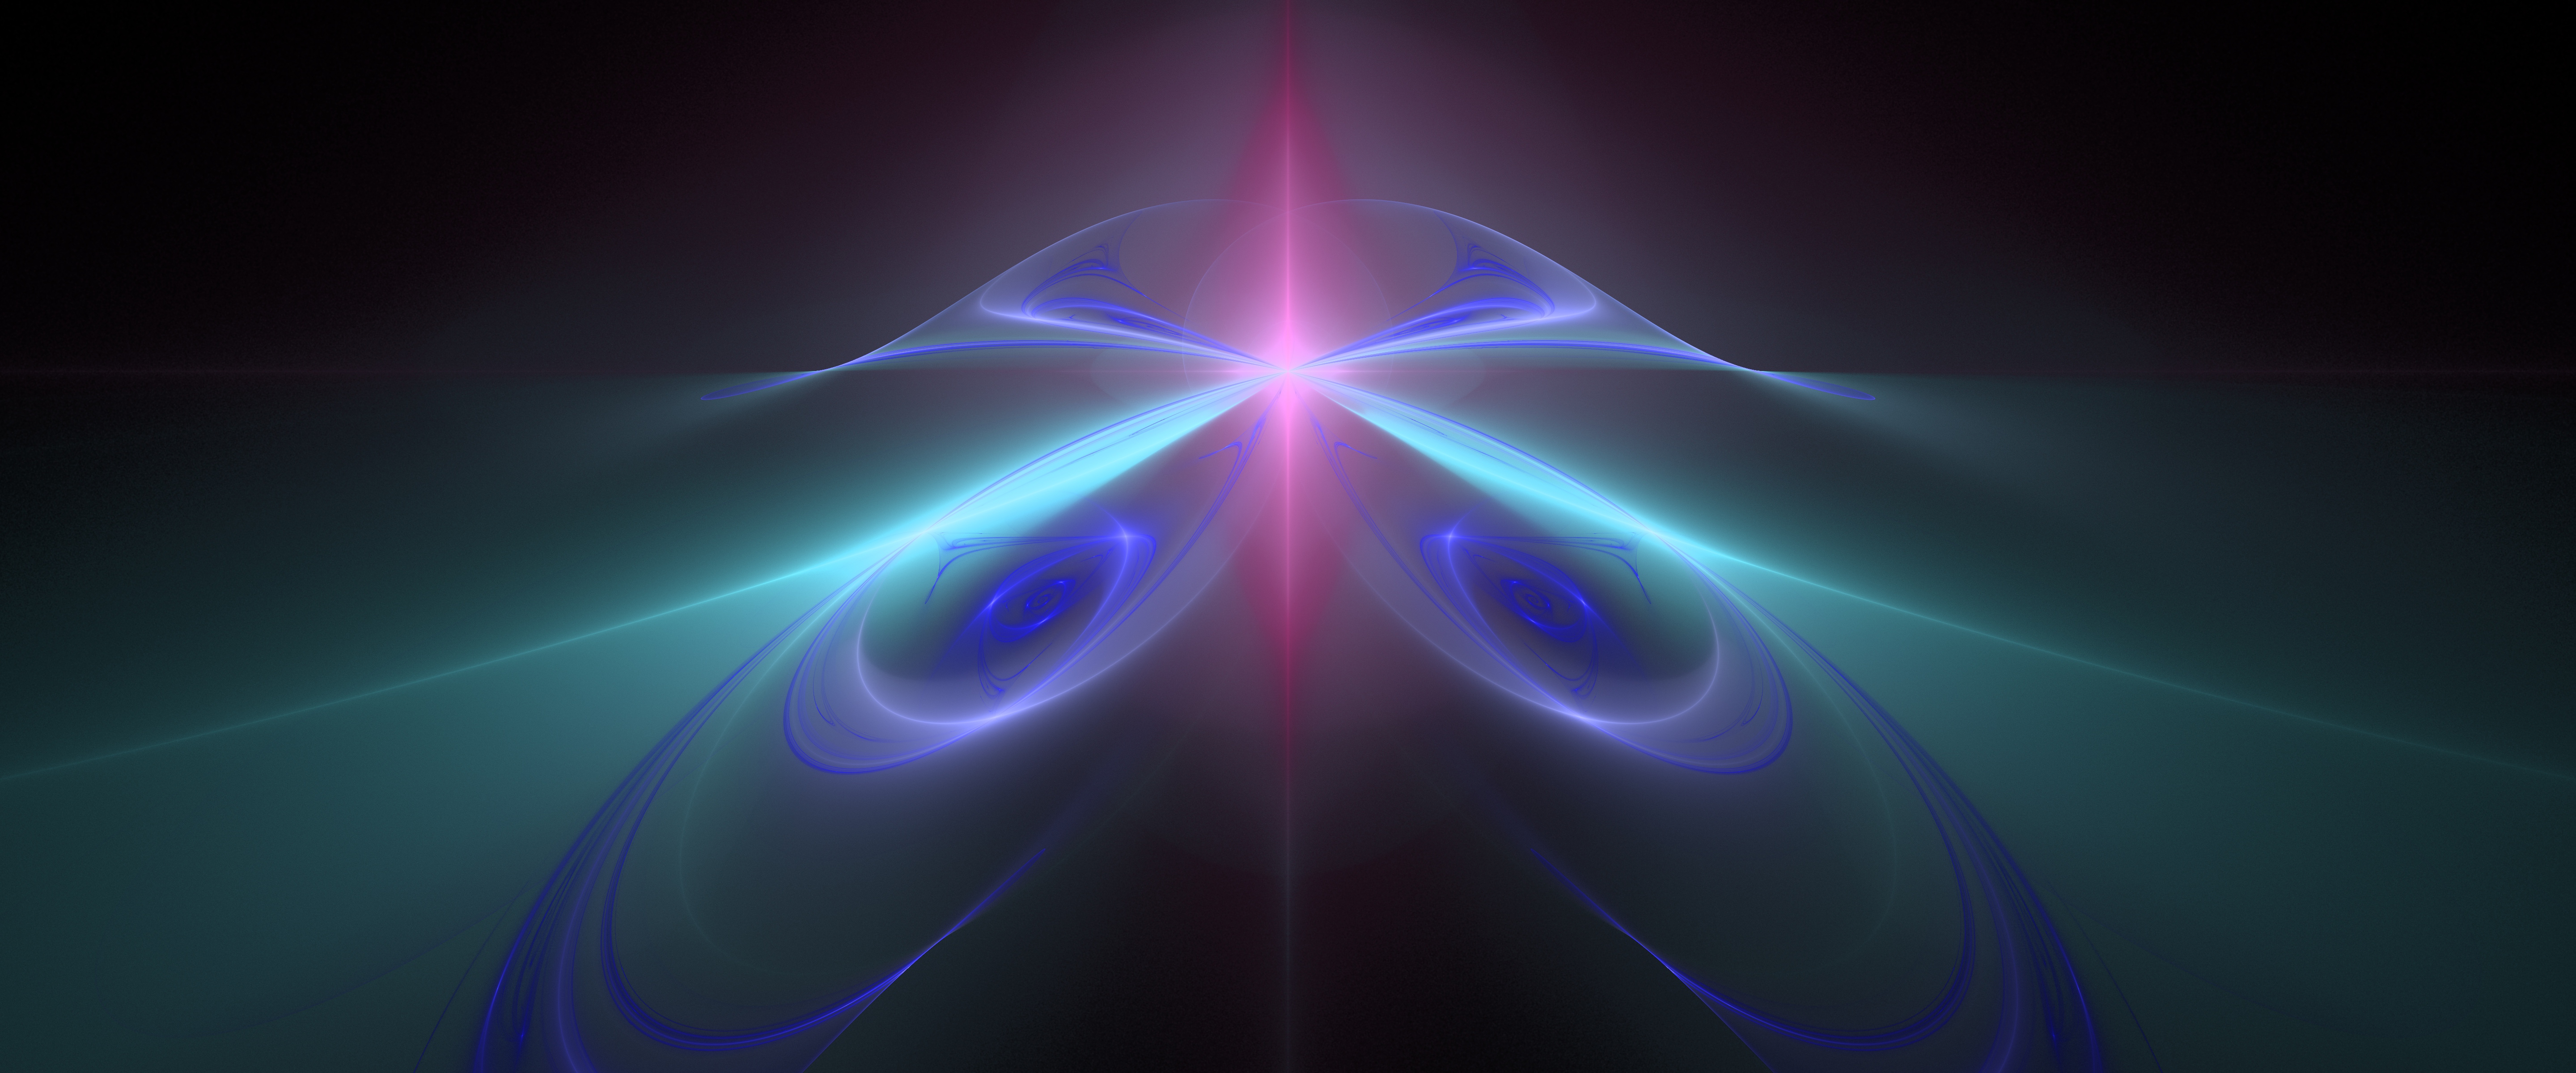 Fractal Fractal Flame Pattern Symmetry Bright Abstract Psychedelic Mathematics Wide Screen Technolog 5760x2400